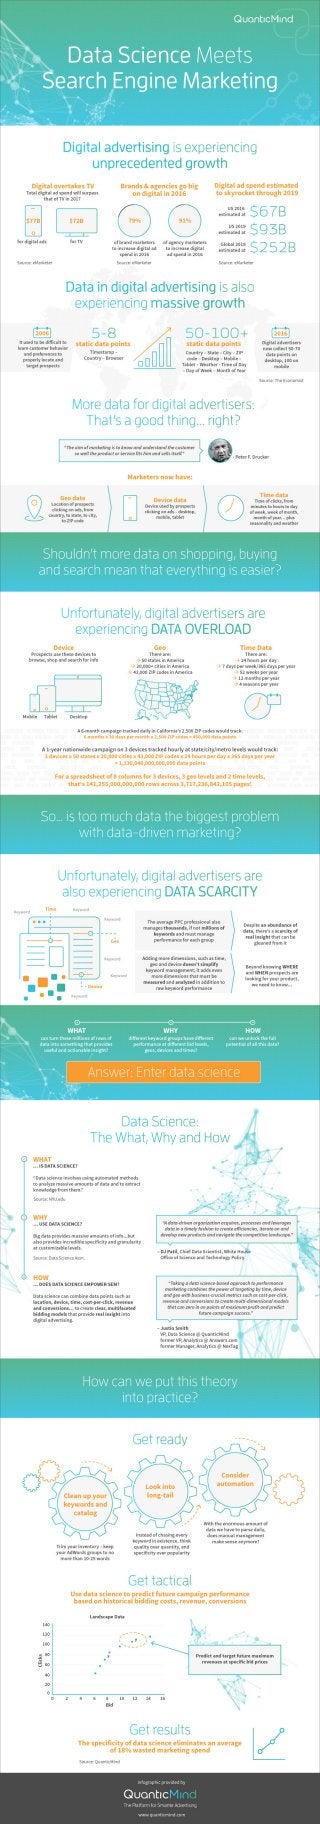 [Infographic] Data Science Meets SEM